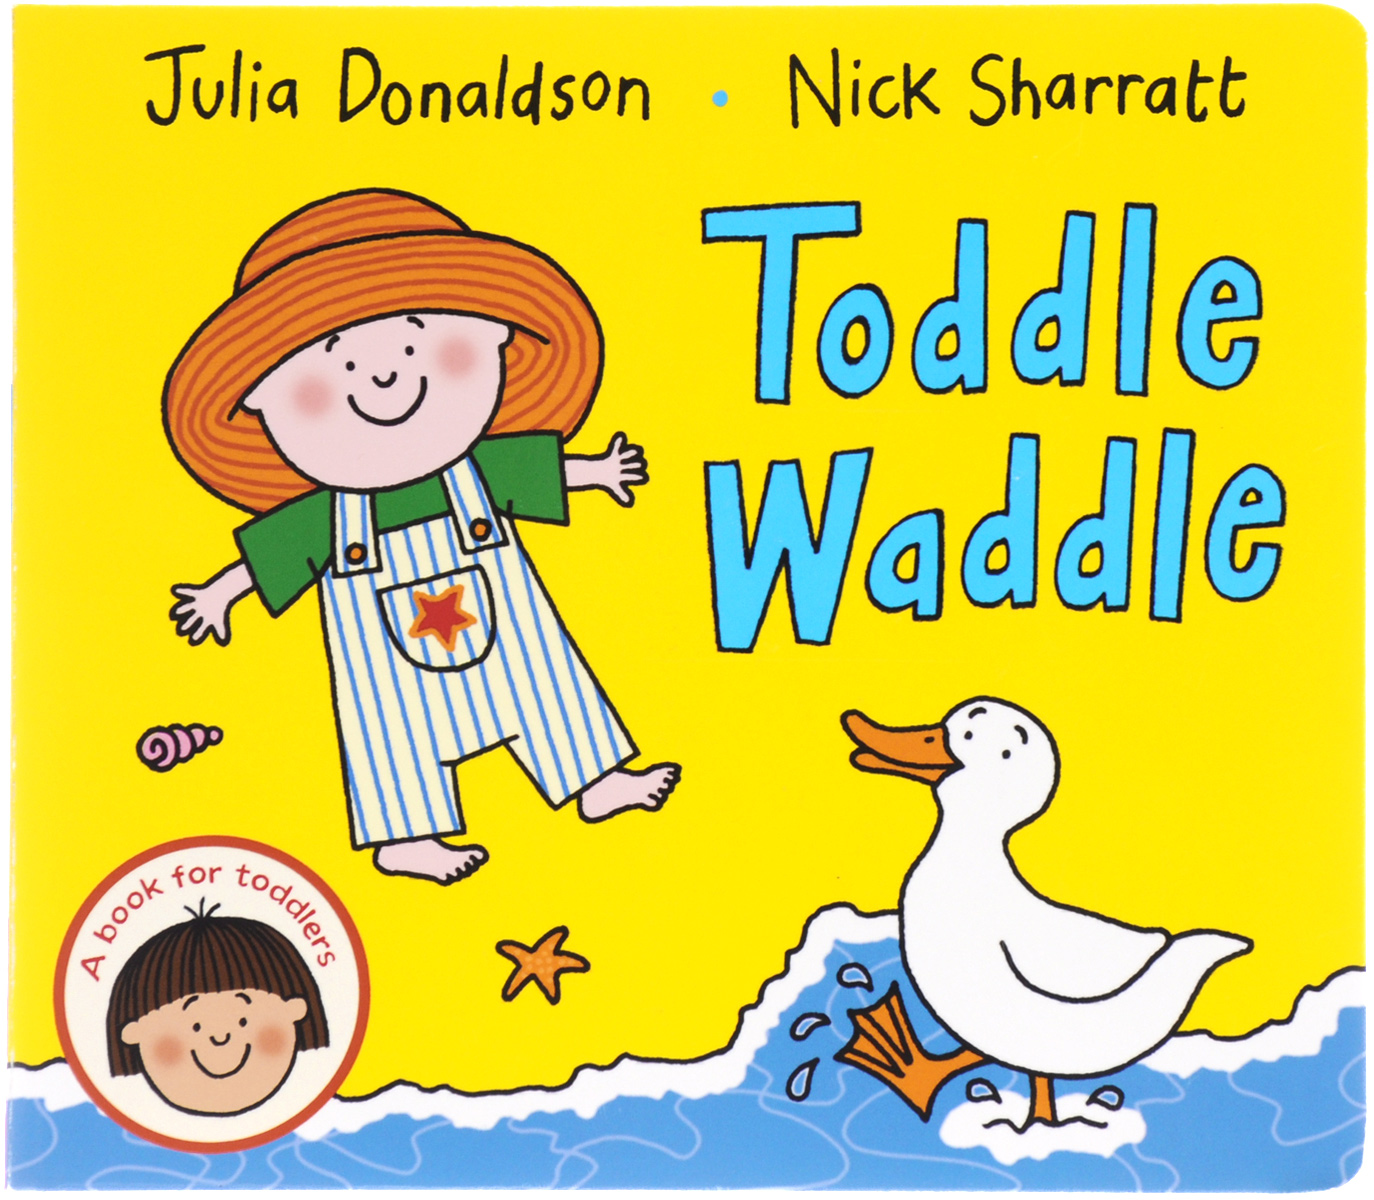 Toddle Waddle